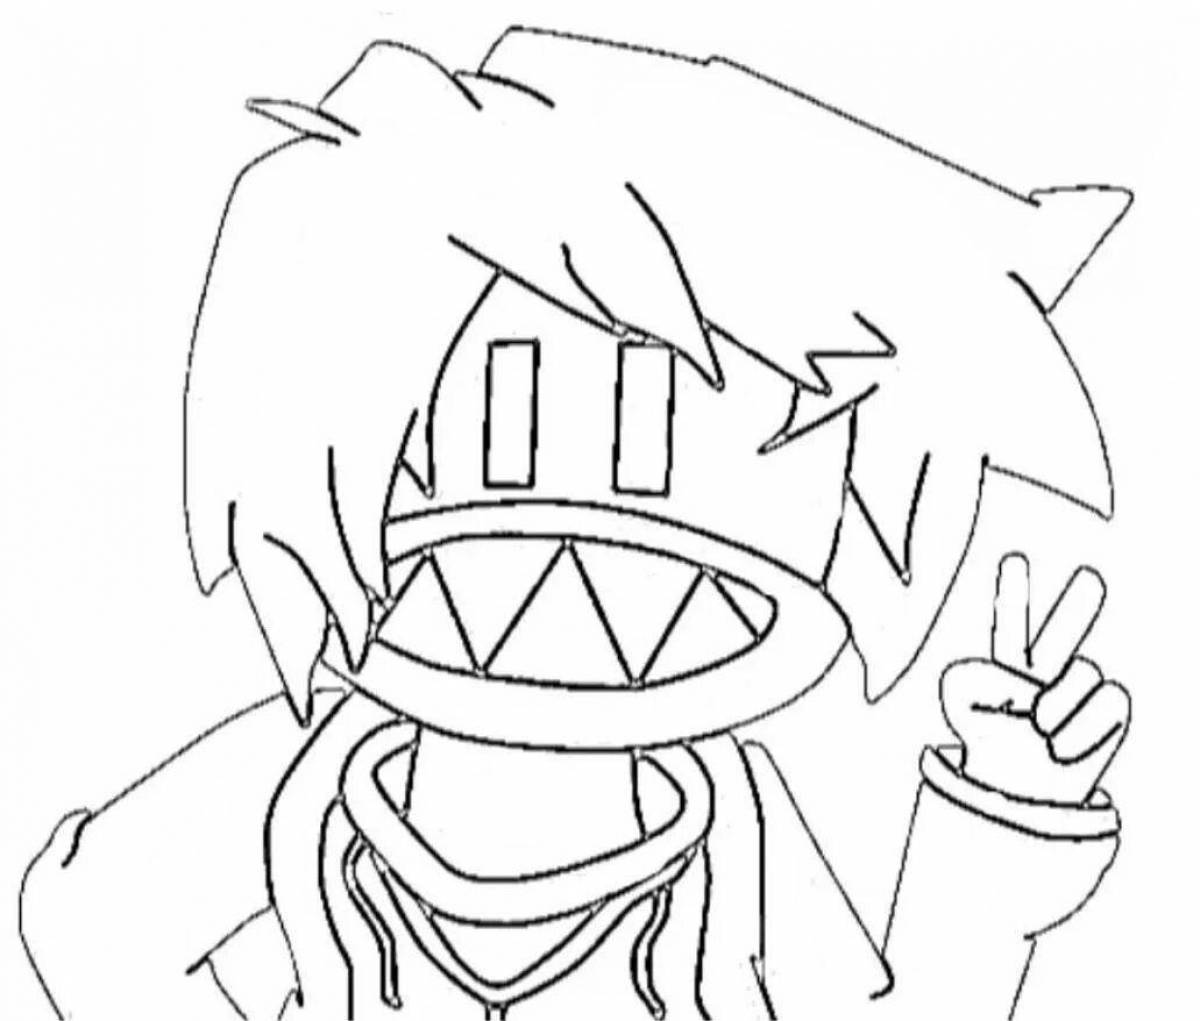 Roblox live face coloring page